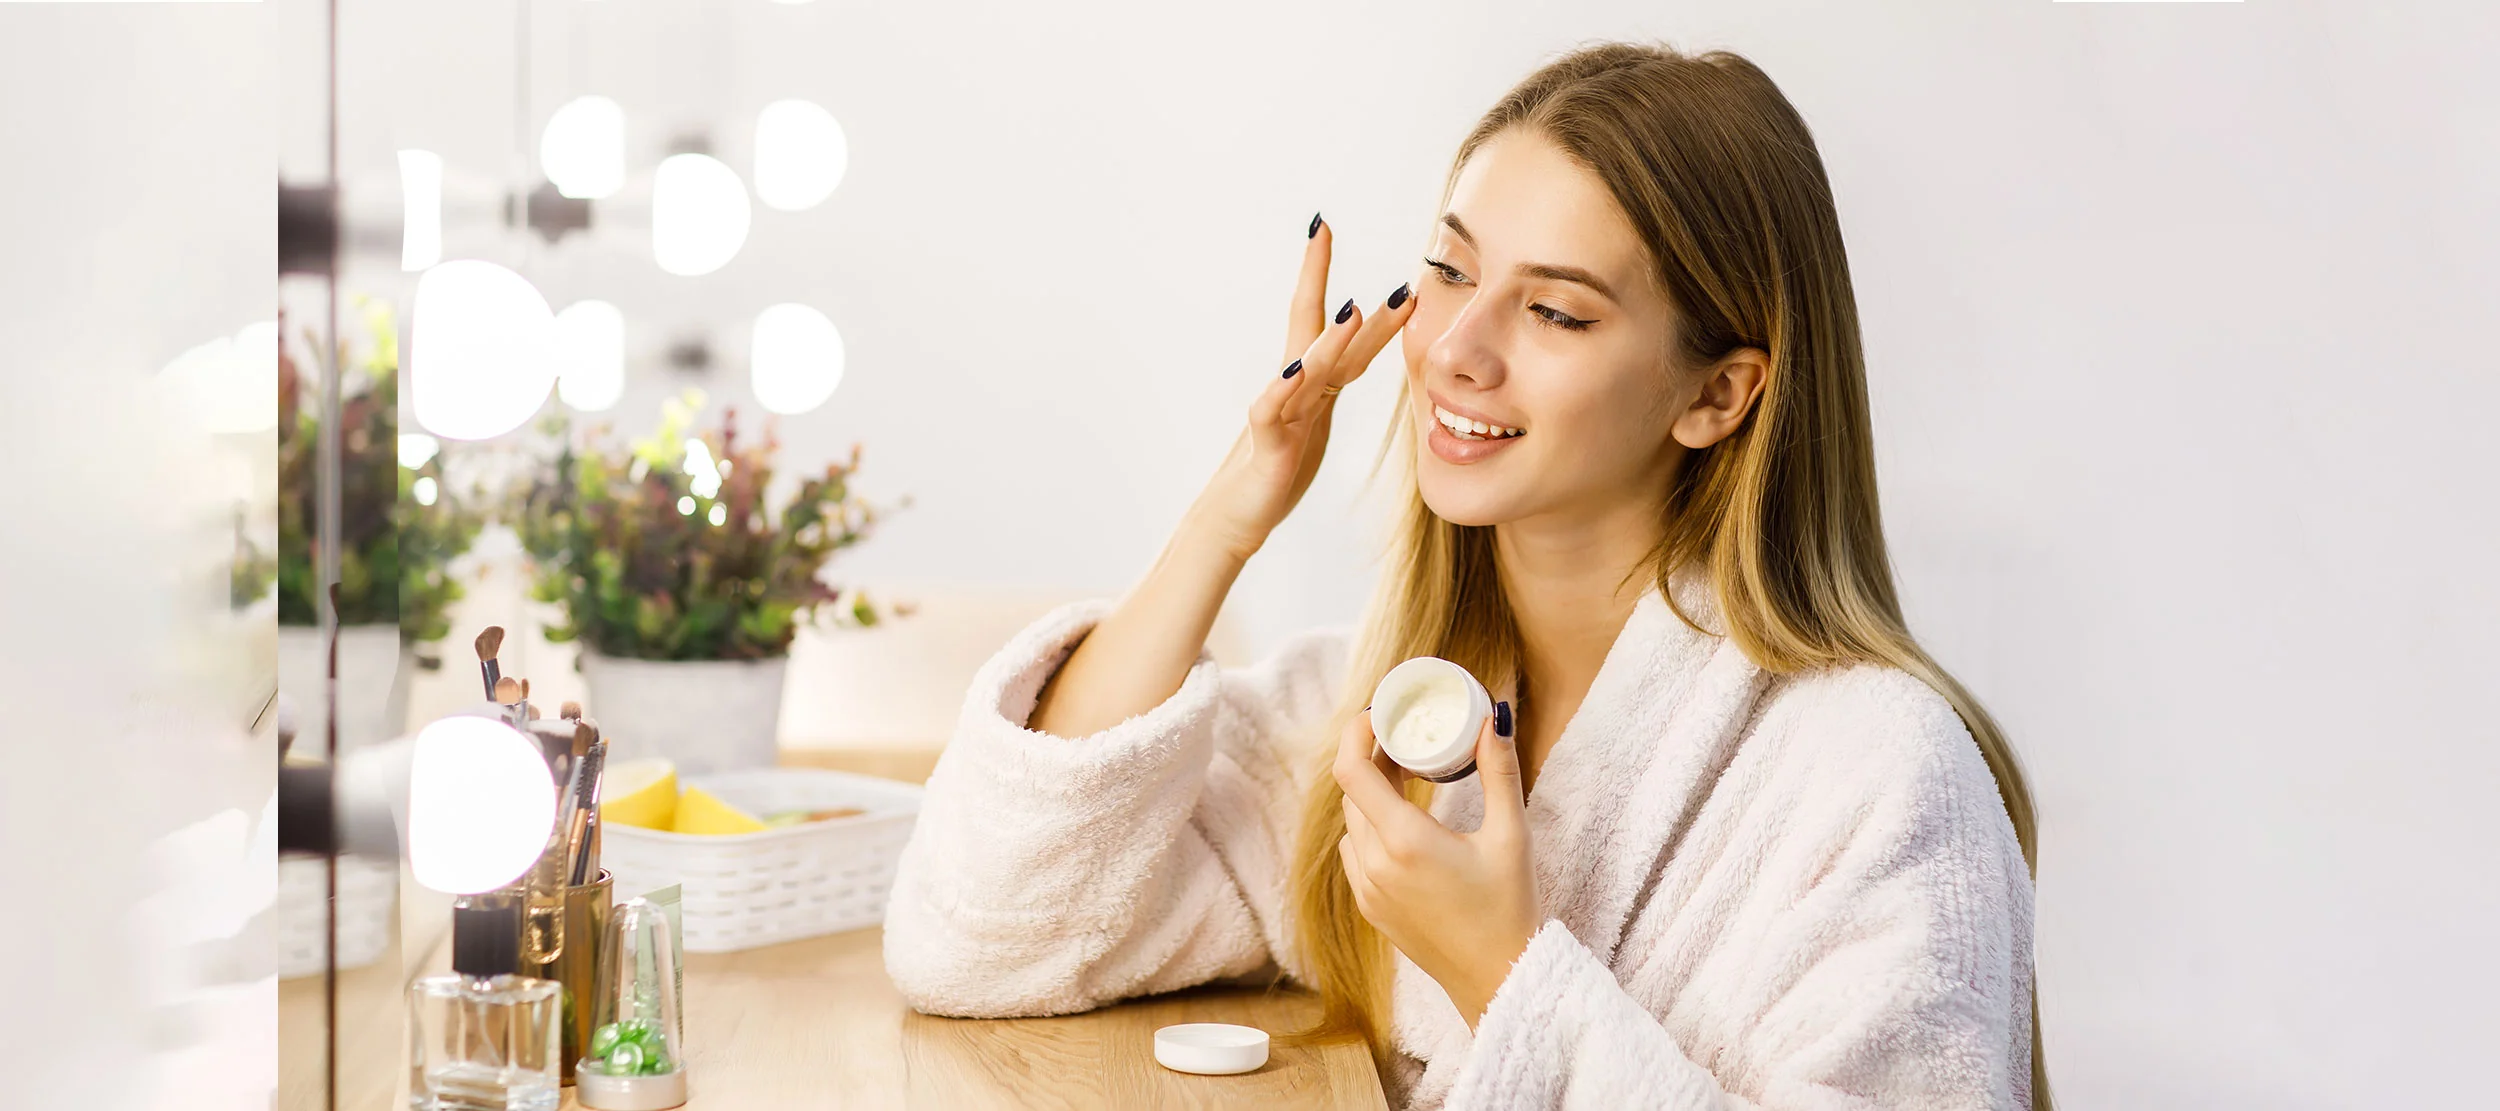 How to Prep Your Skin for Makeup